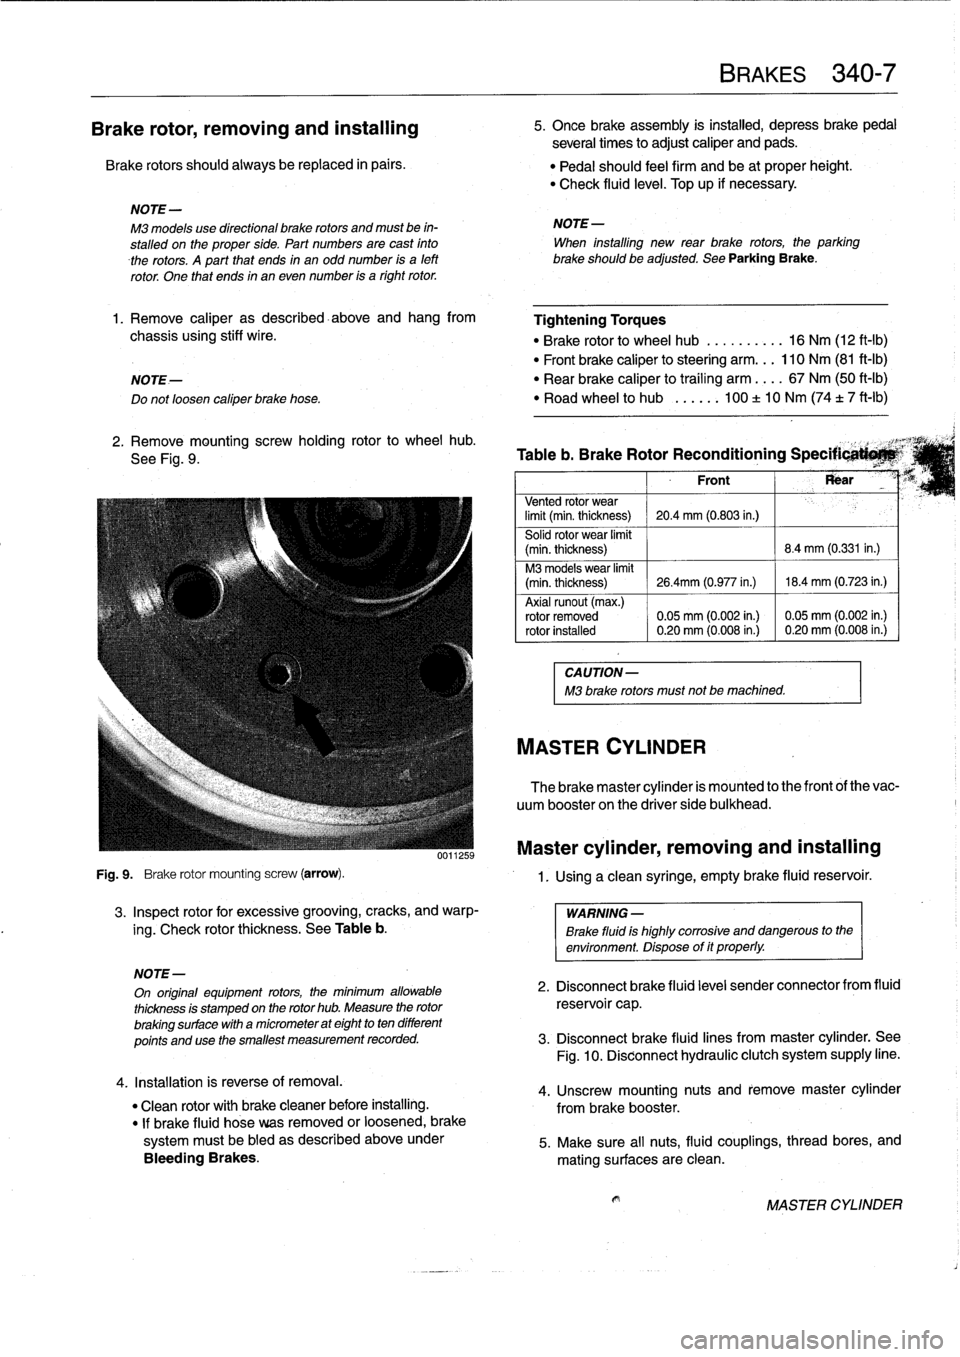 BMW 318i 1997 E36 User Guide 
Brake
rotor,
removing
and
installing

Brake
rotors
shouldalways
be
replaced
in
pairs
.

Fig
.
9
.

	

Brake
rotor
mounting
screw
(arrow)
.

3
.
Inspect
rotor
for
excessive
grooving,
cracks,
and
warp-